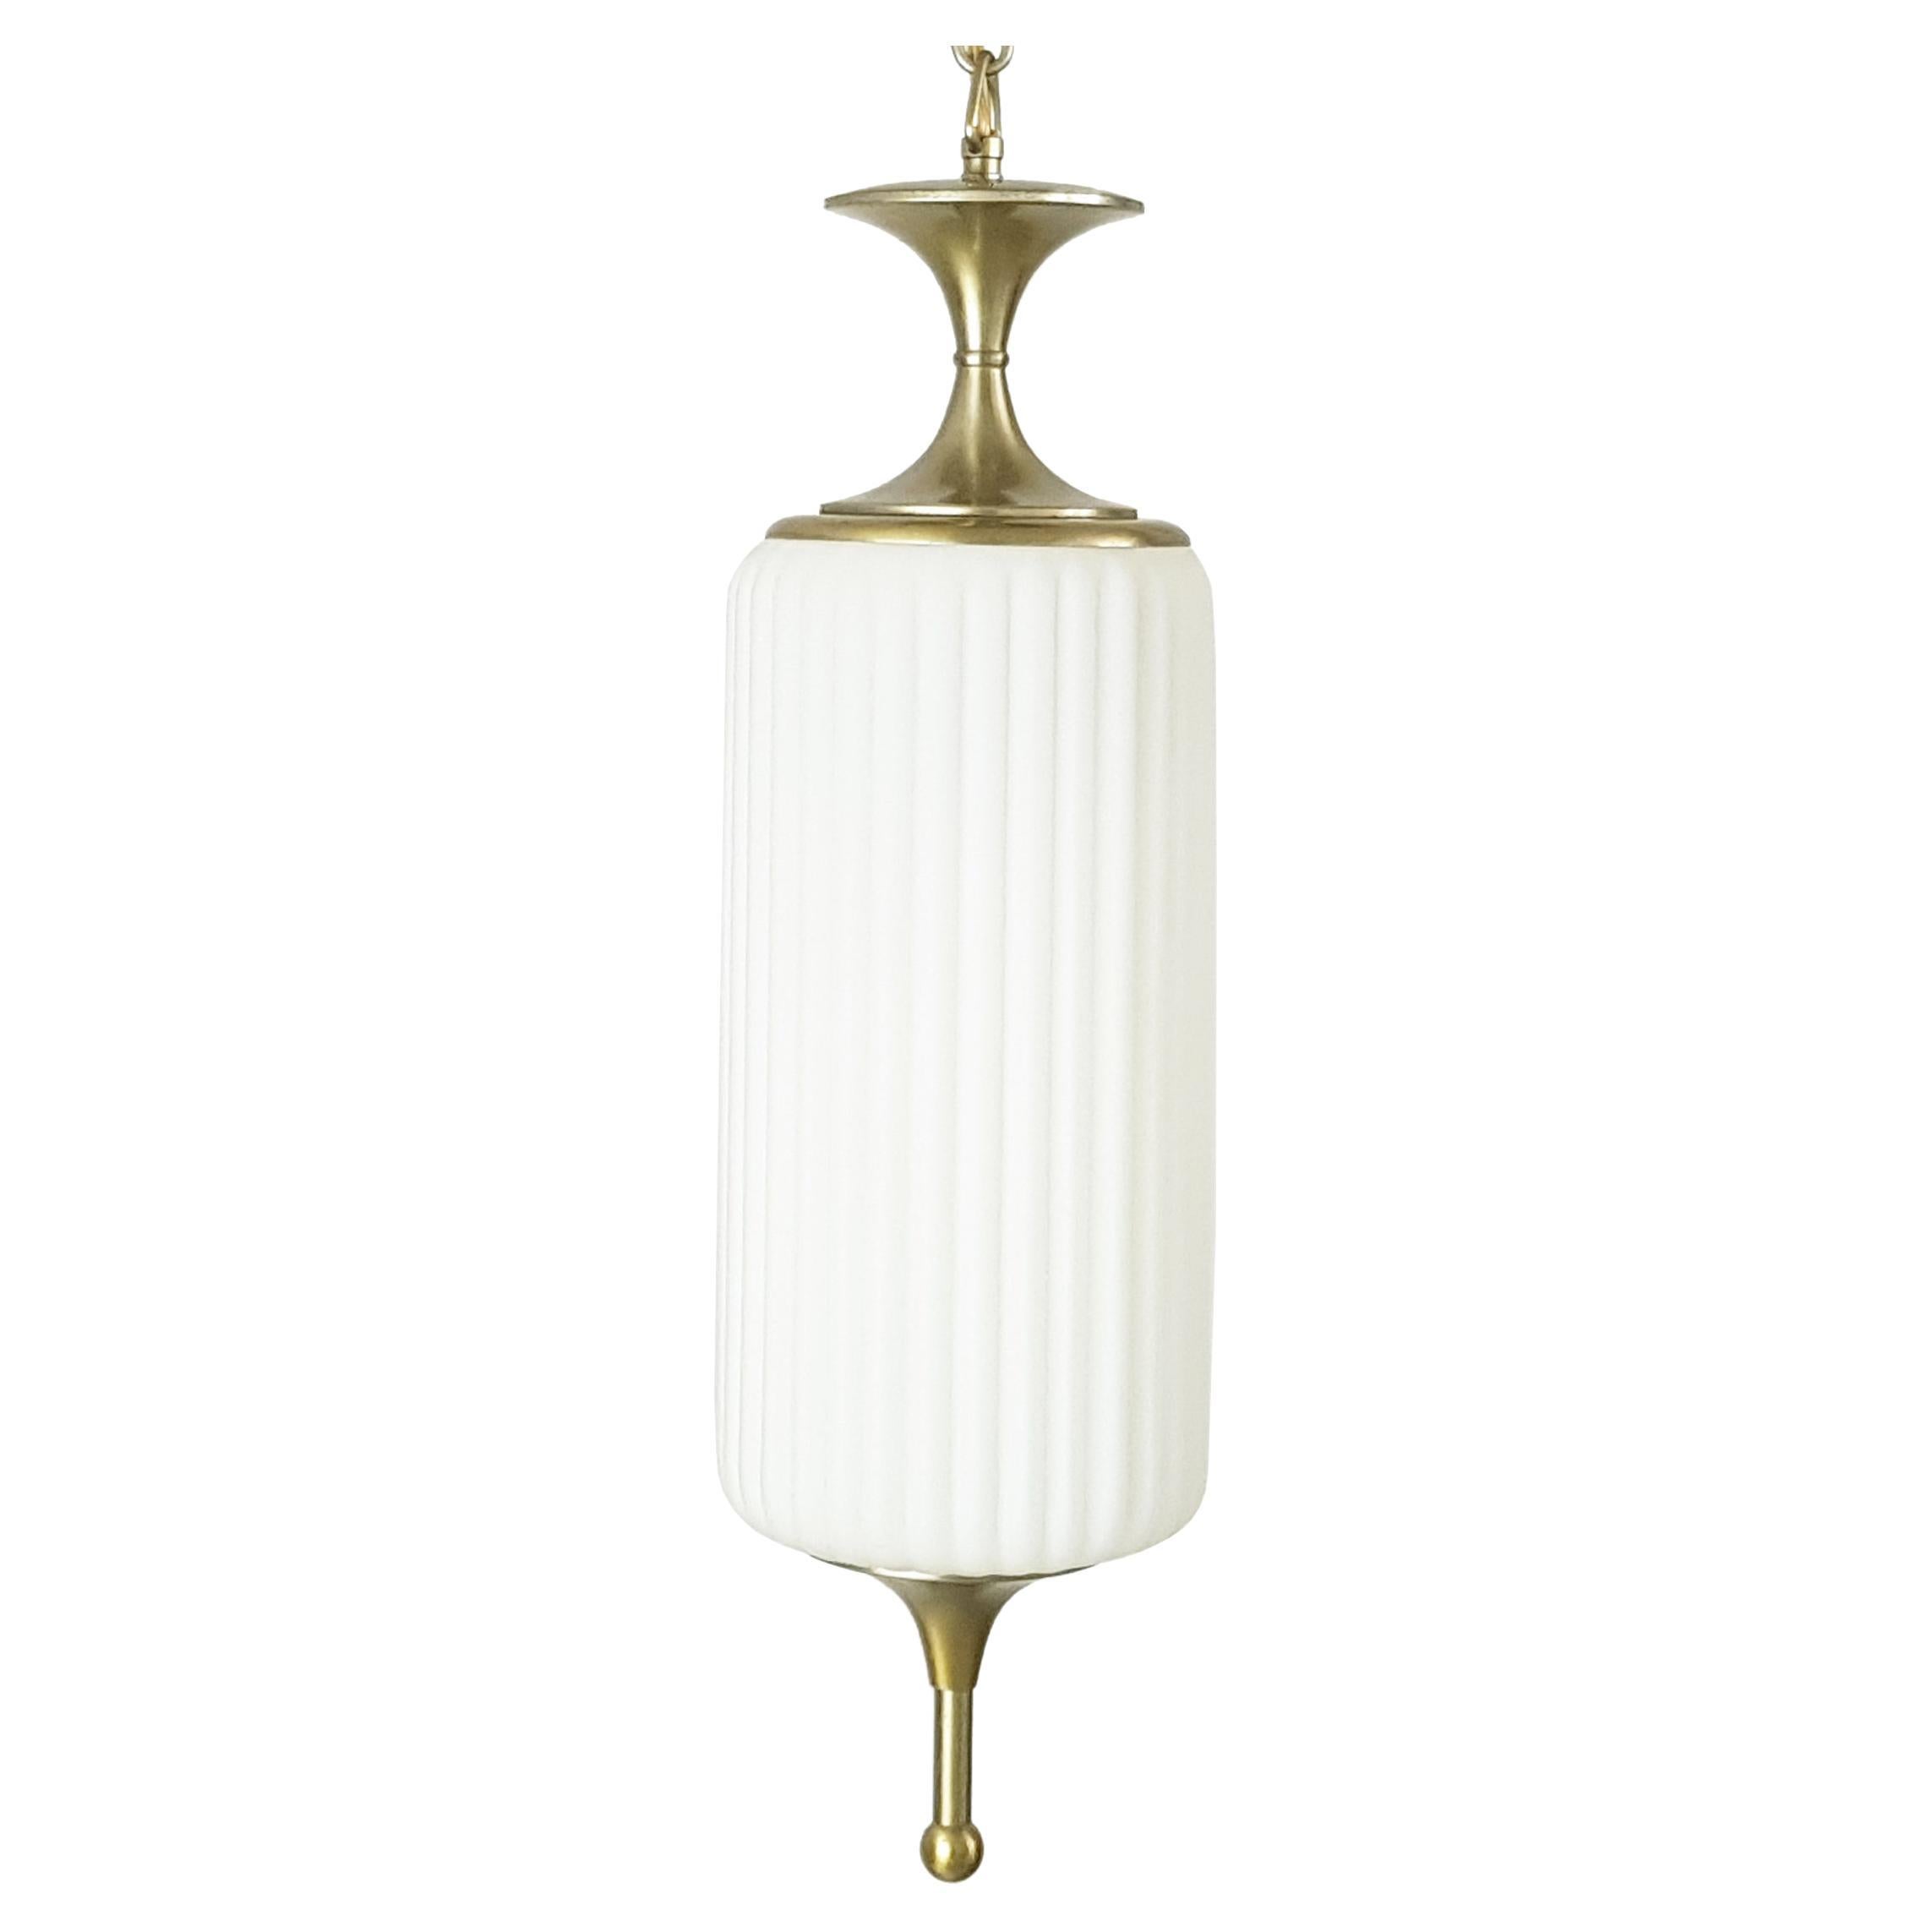 Opaline Glass & Nickel Plated Metal 1960s Pendant Lamp by Reggiani, Italy